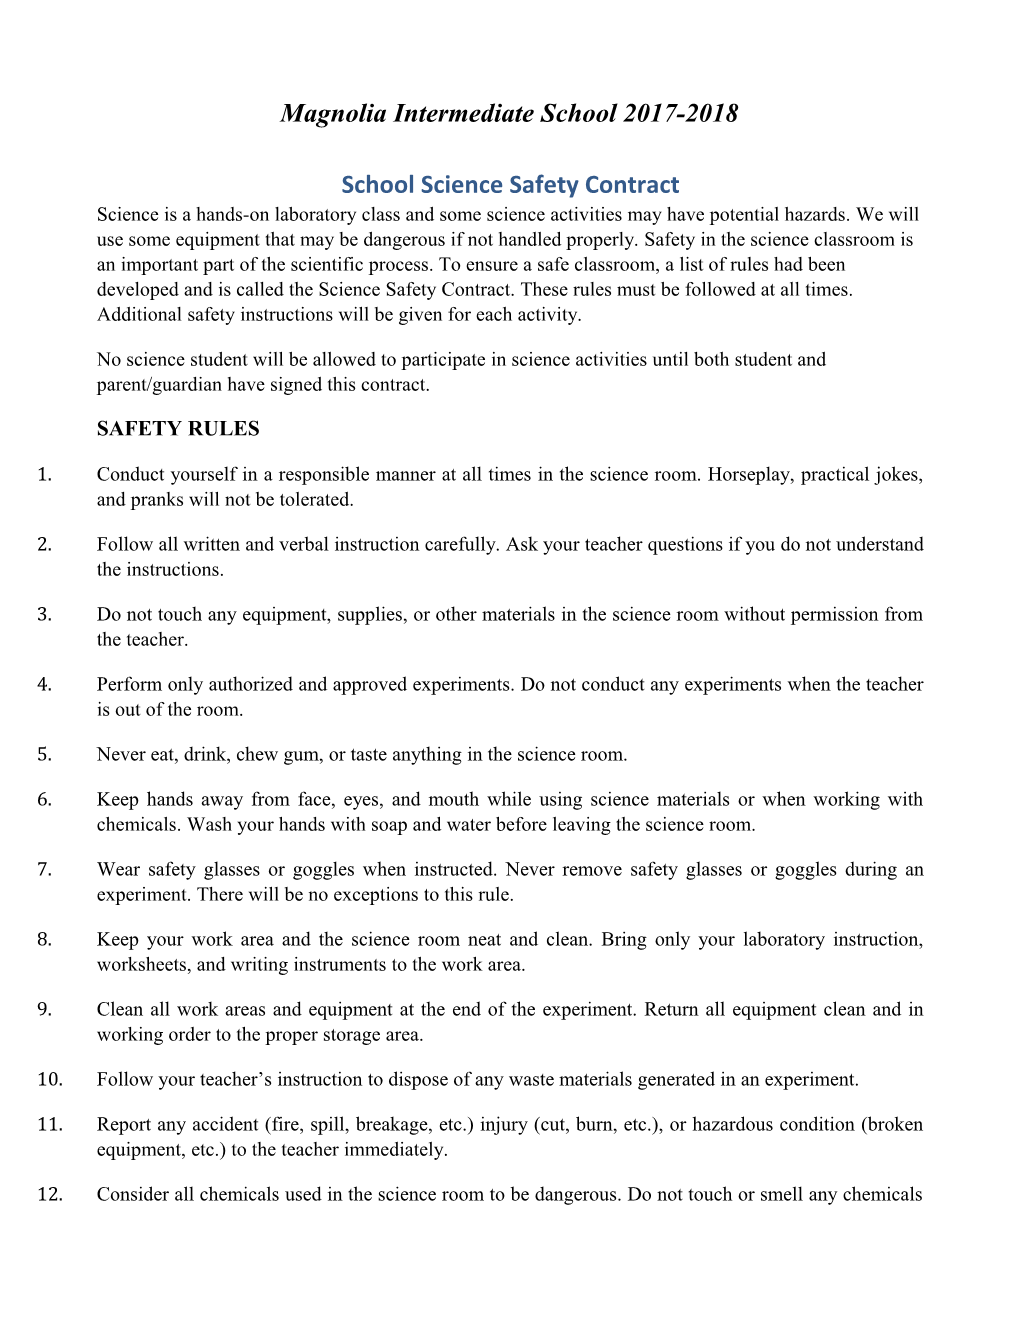 School Science Safety Contract